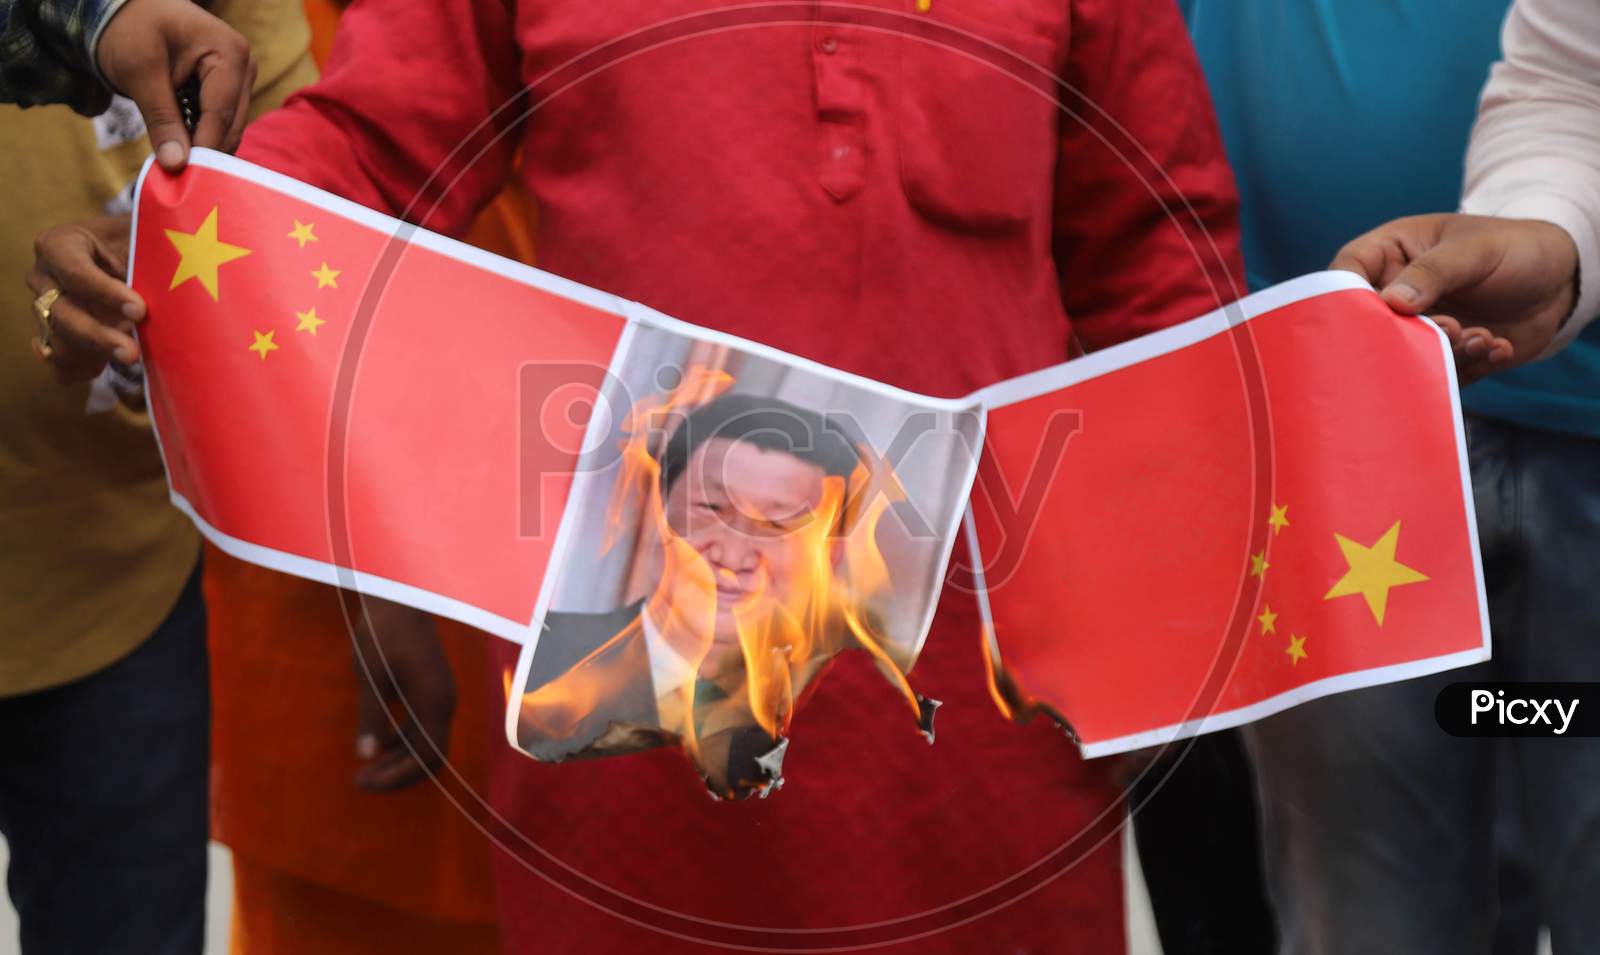 Supporters Of Bharatiya Jayanta Party (Bjp) Burn Posters and Effigy Of Chinese President Xi Jinping During A Protest Against China after a violent face-off between Indian Army and Chinese PLA , In Prayagraj, June 17, 2020.